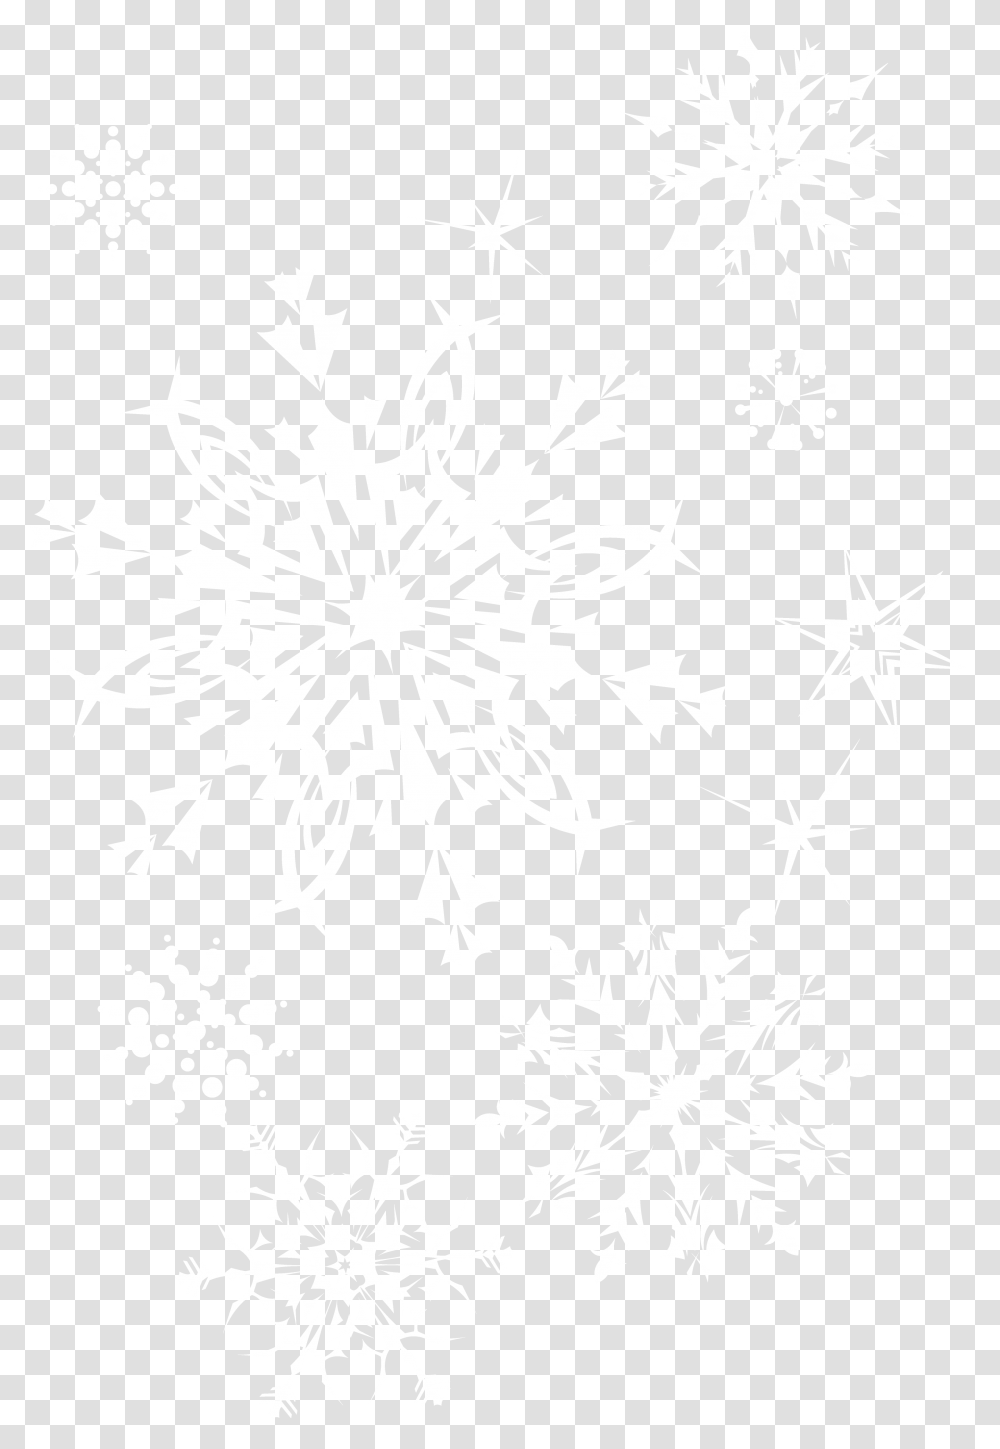 Background White Snowflake High Resolution Christmas Pattern Background, Graphics, Art, Floral Design Transparent Png